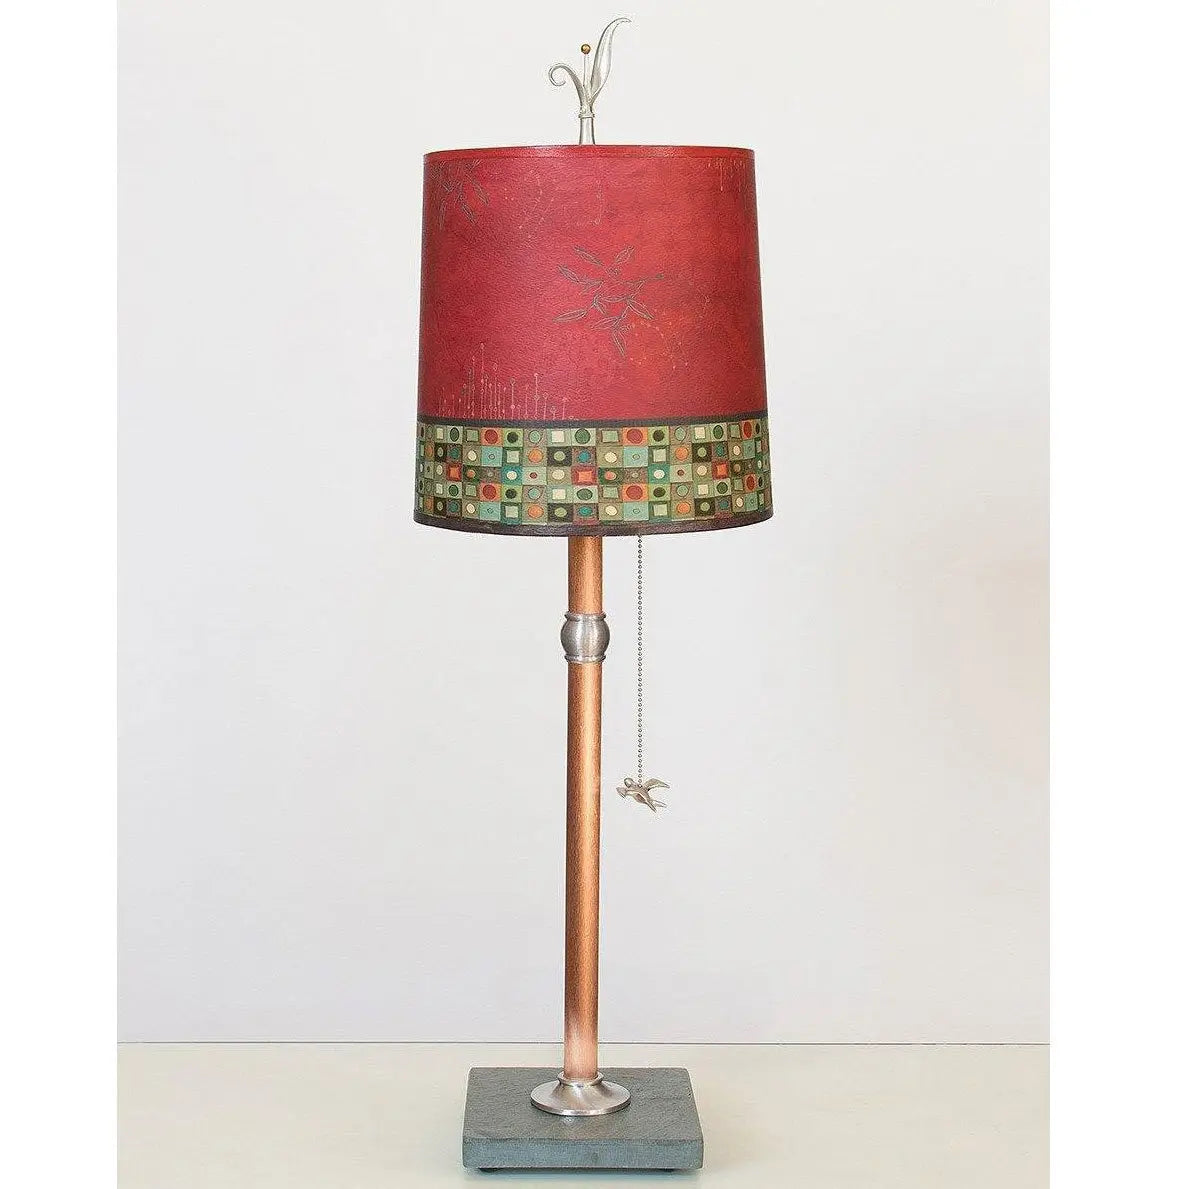 Zwakheid weer Master diploma Copper Table Lamp by Janna Ugone RLG810-C with Medium Drum Shade –  Sweetheart Gallery: Contemporary Craft Gallery, Fine American Craft, Art,  Design, Handmade Home & Personal Accessories